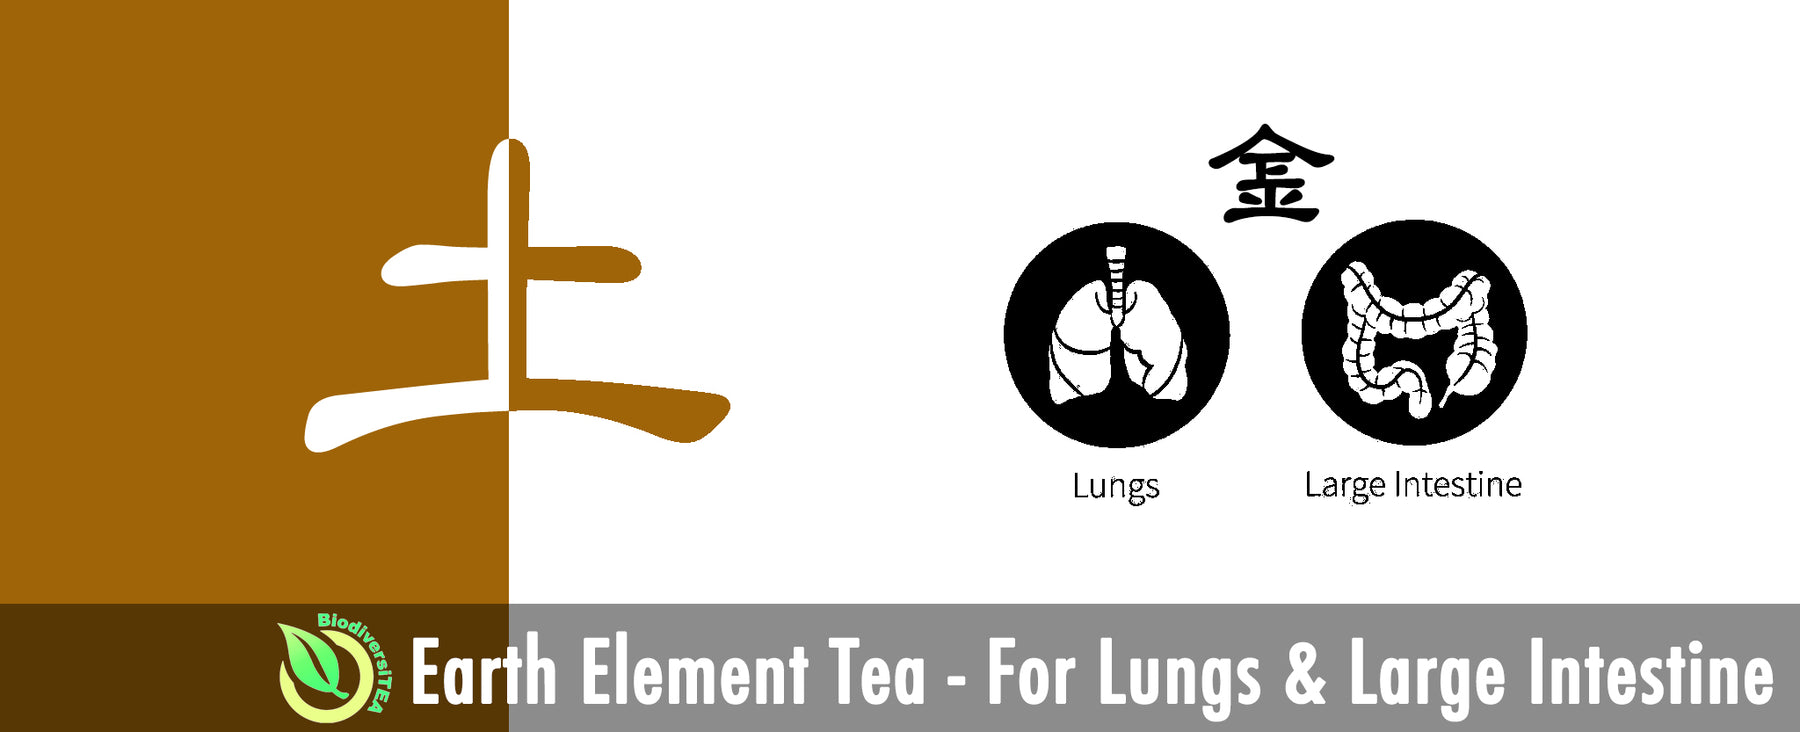 Earth Element Tea - For Lungs & Large Intestine